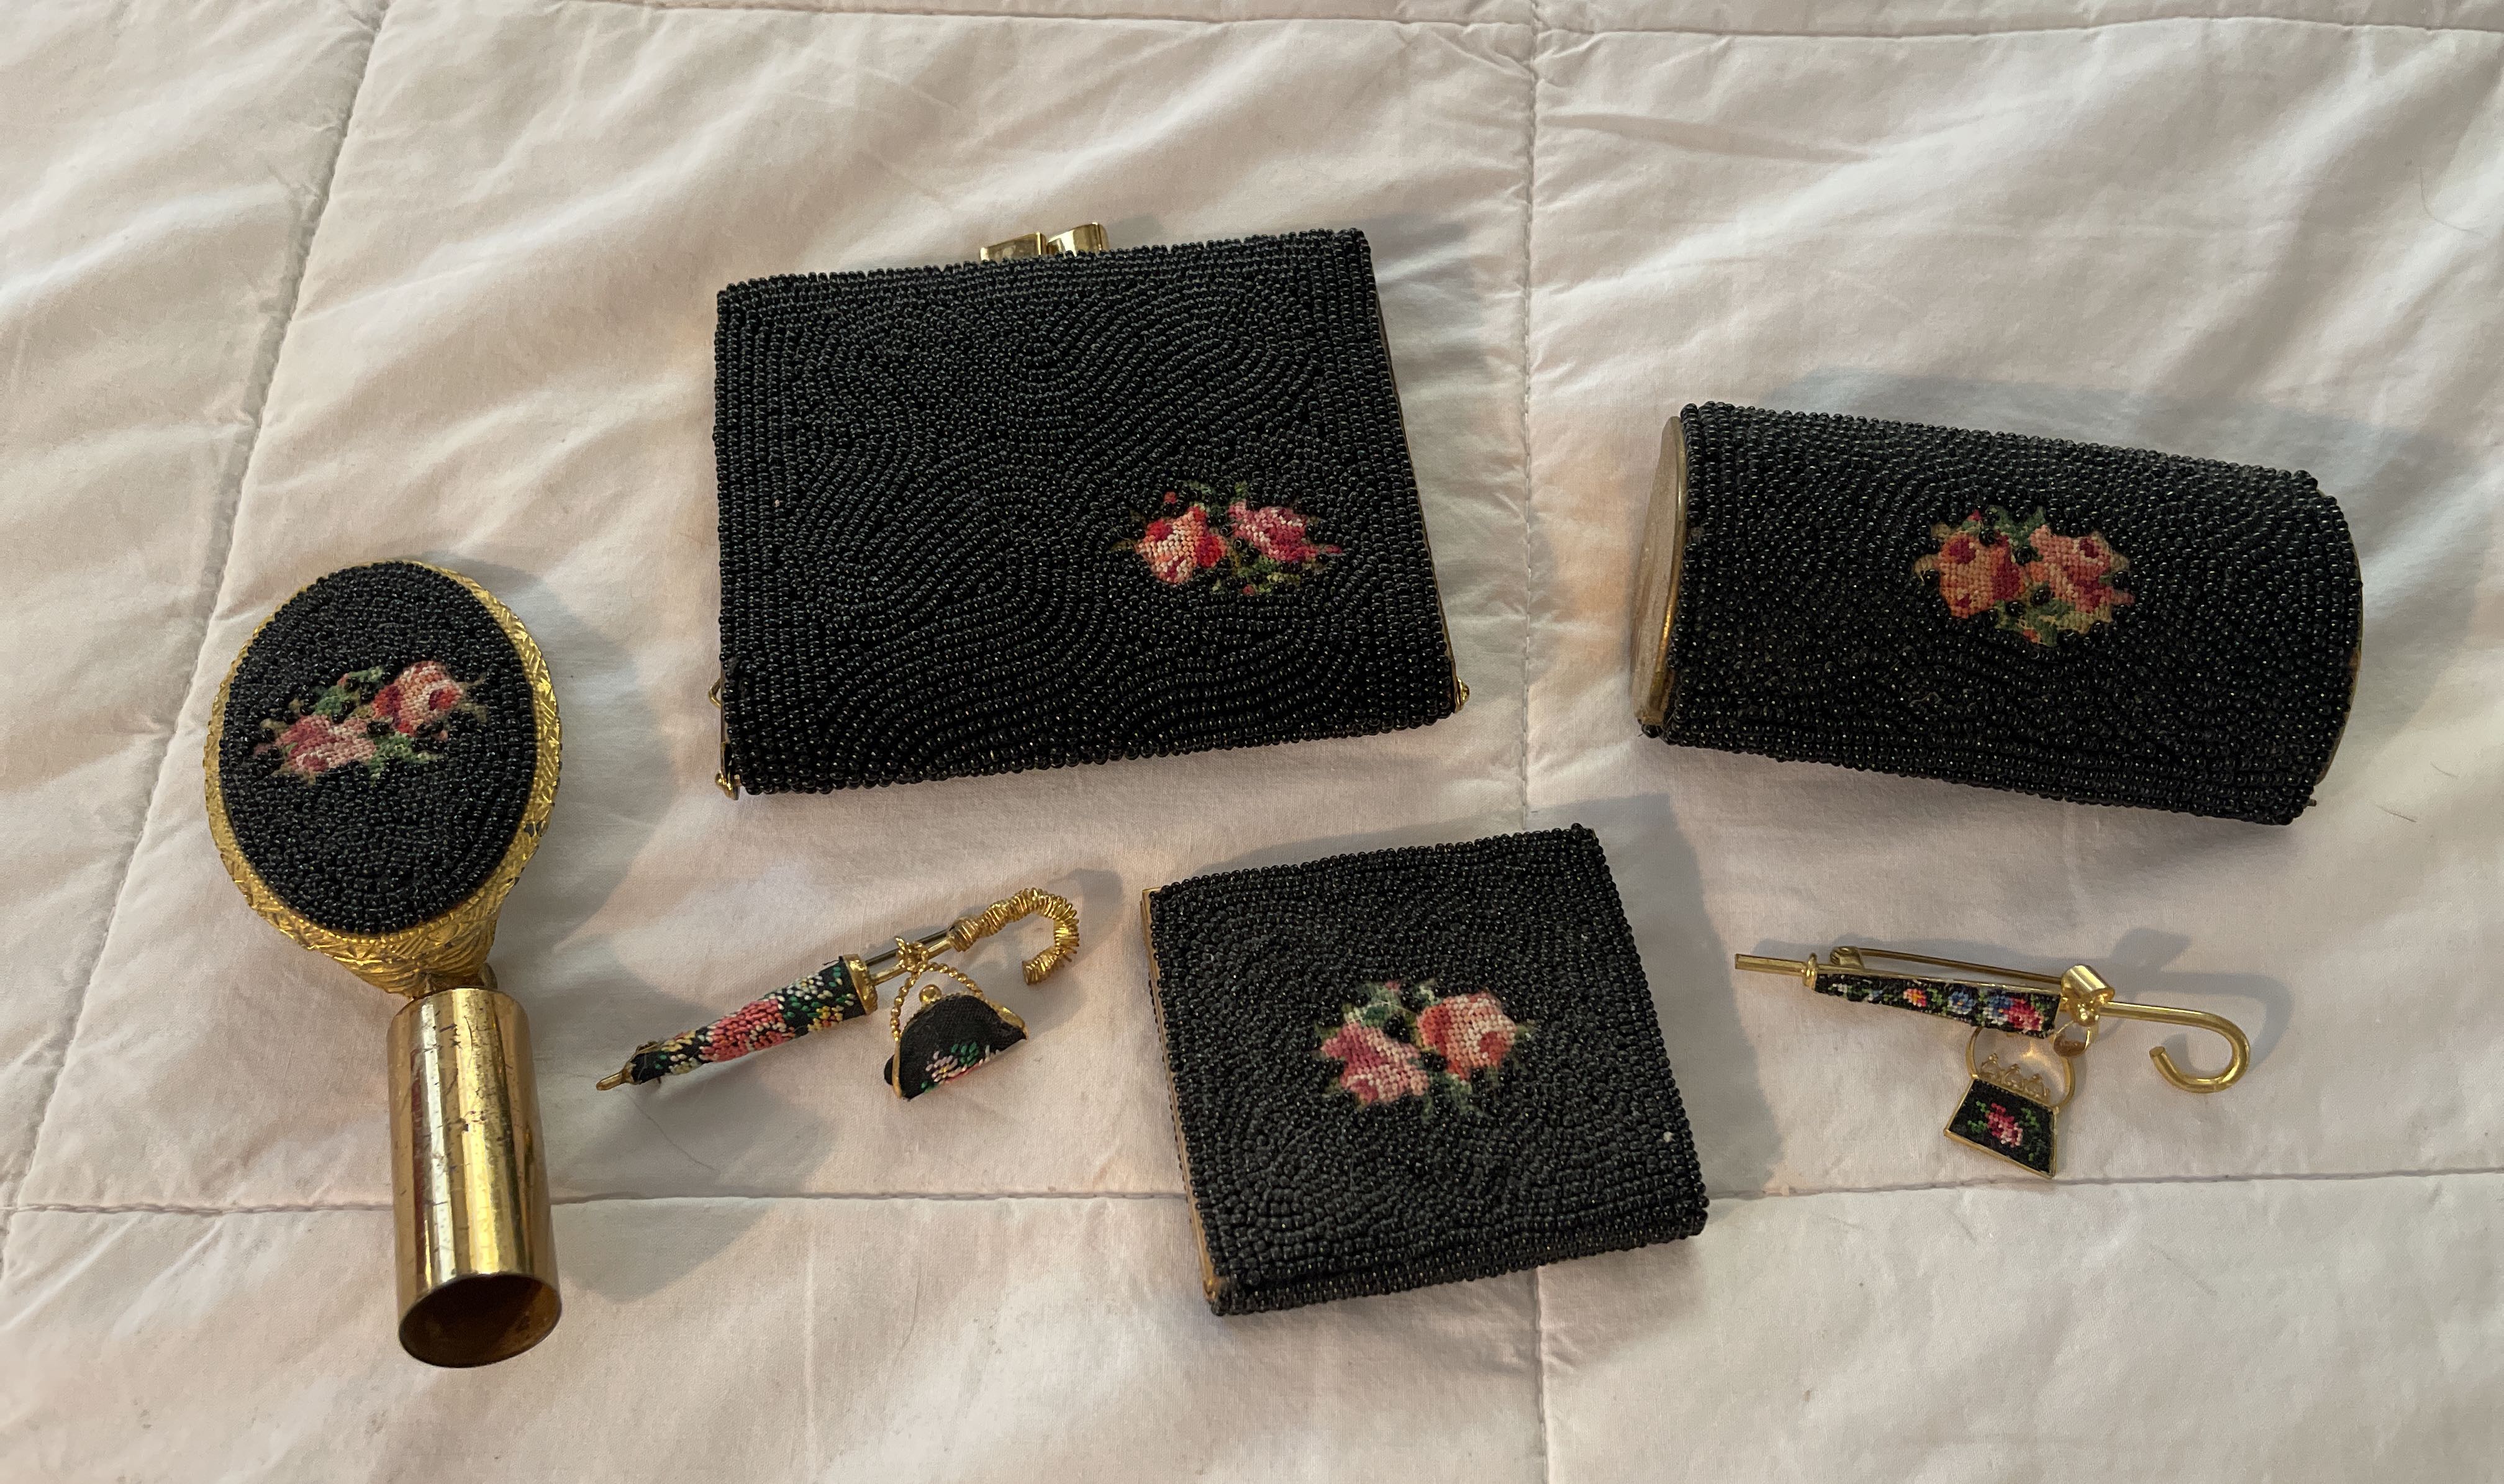 Lot - Lot of six vintage purses. Includes a Whting & Davis cream color  enamel bag, a lovely silk and pastel colored clutch which was made in  France, a small beaded purse